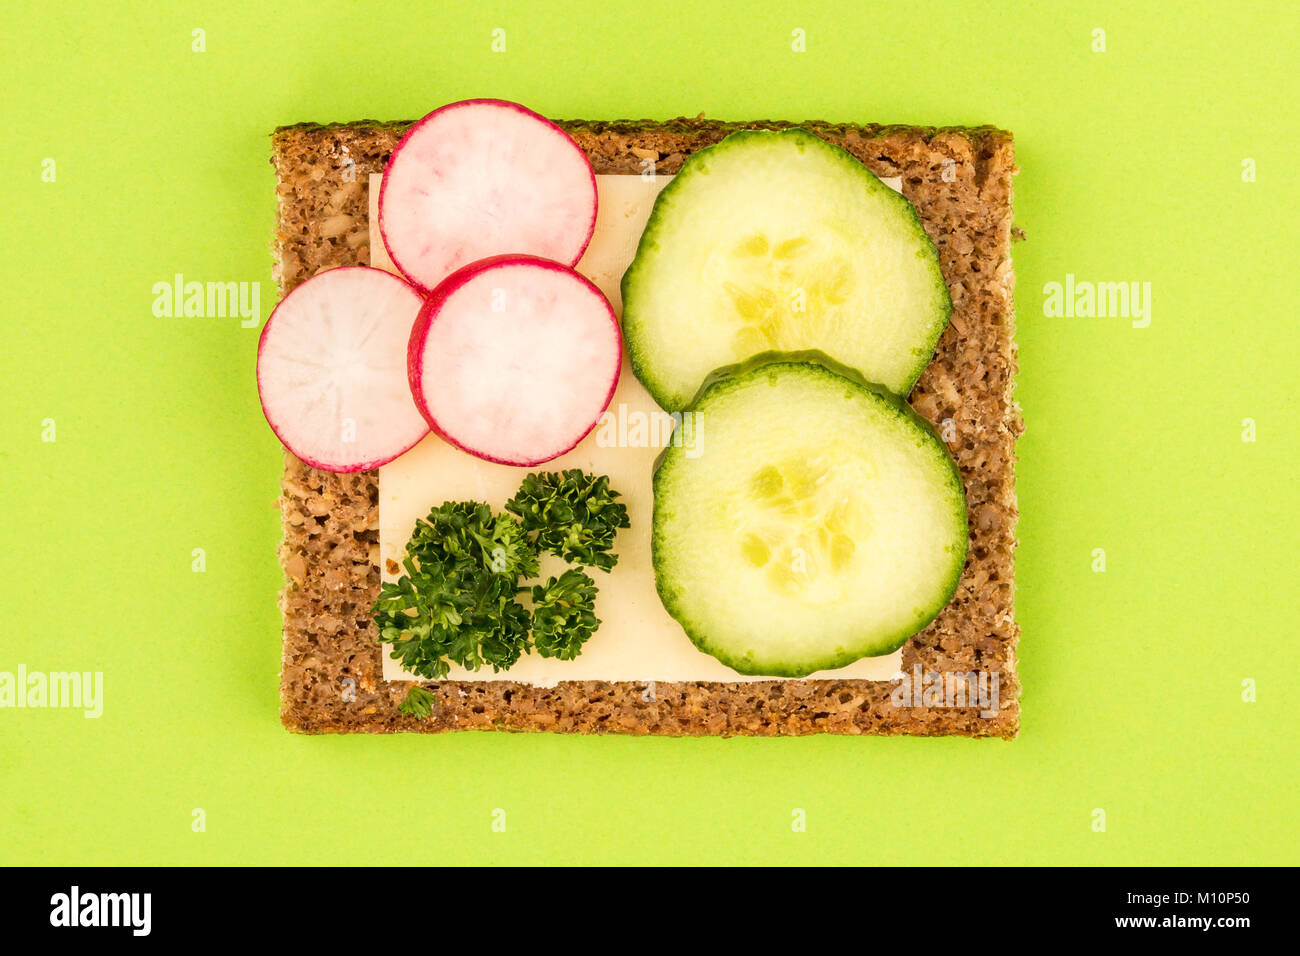 Cheese and Cucumber Open Face Rye Bread Sandwich With Radishes Against A Green Background Stock Photo